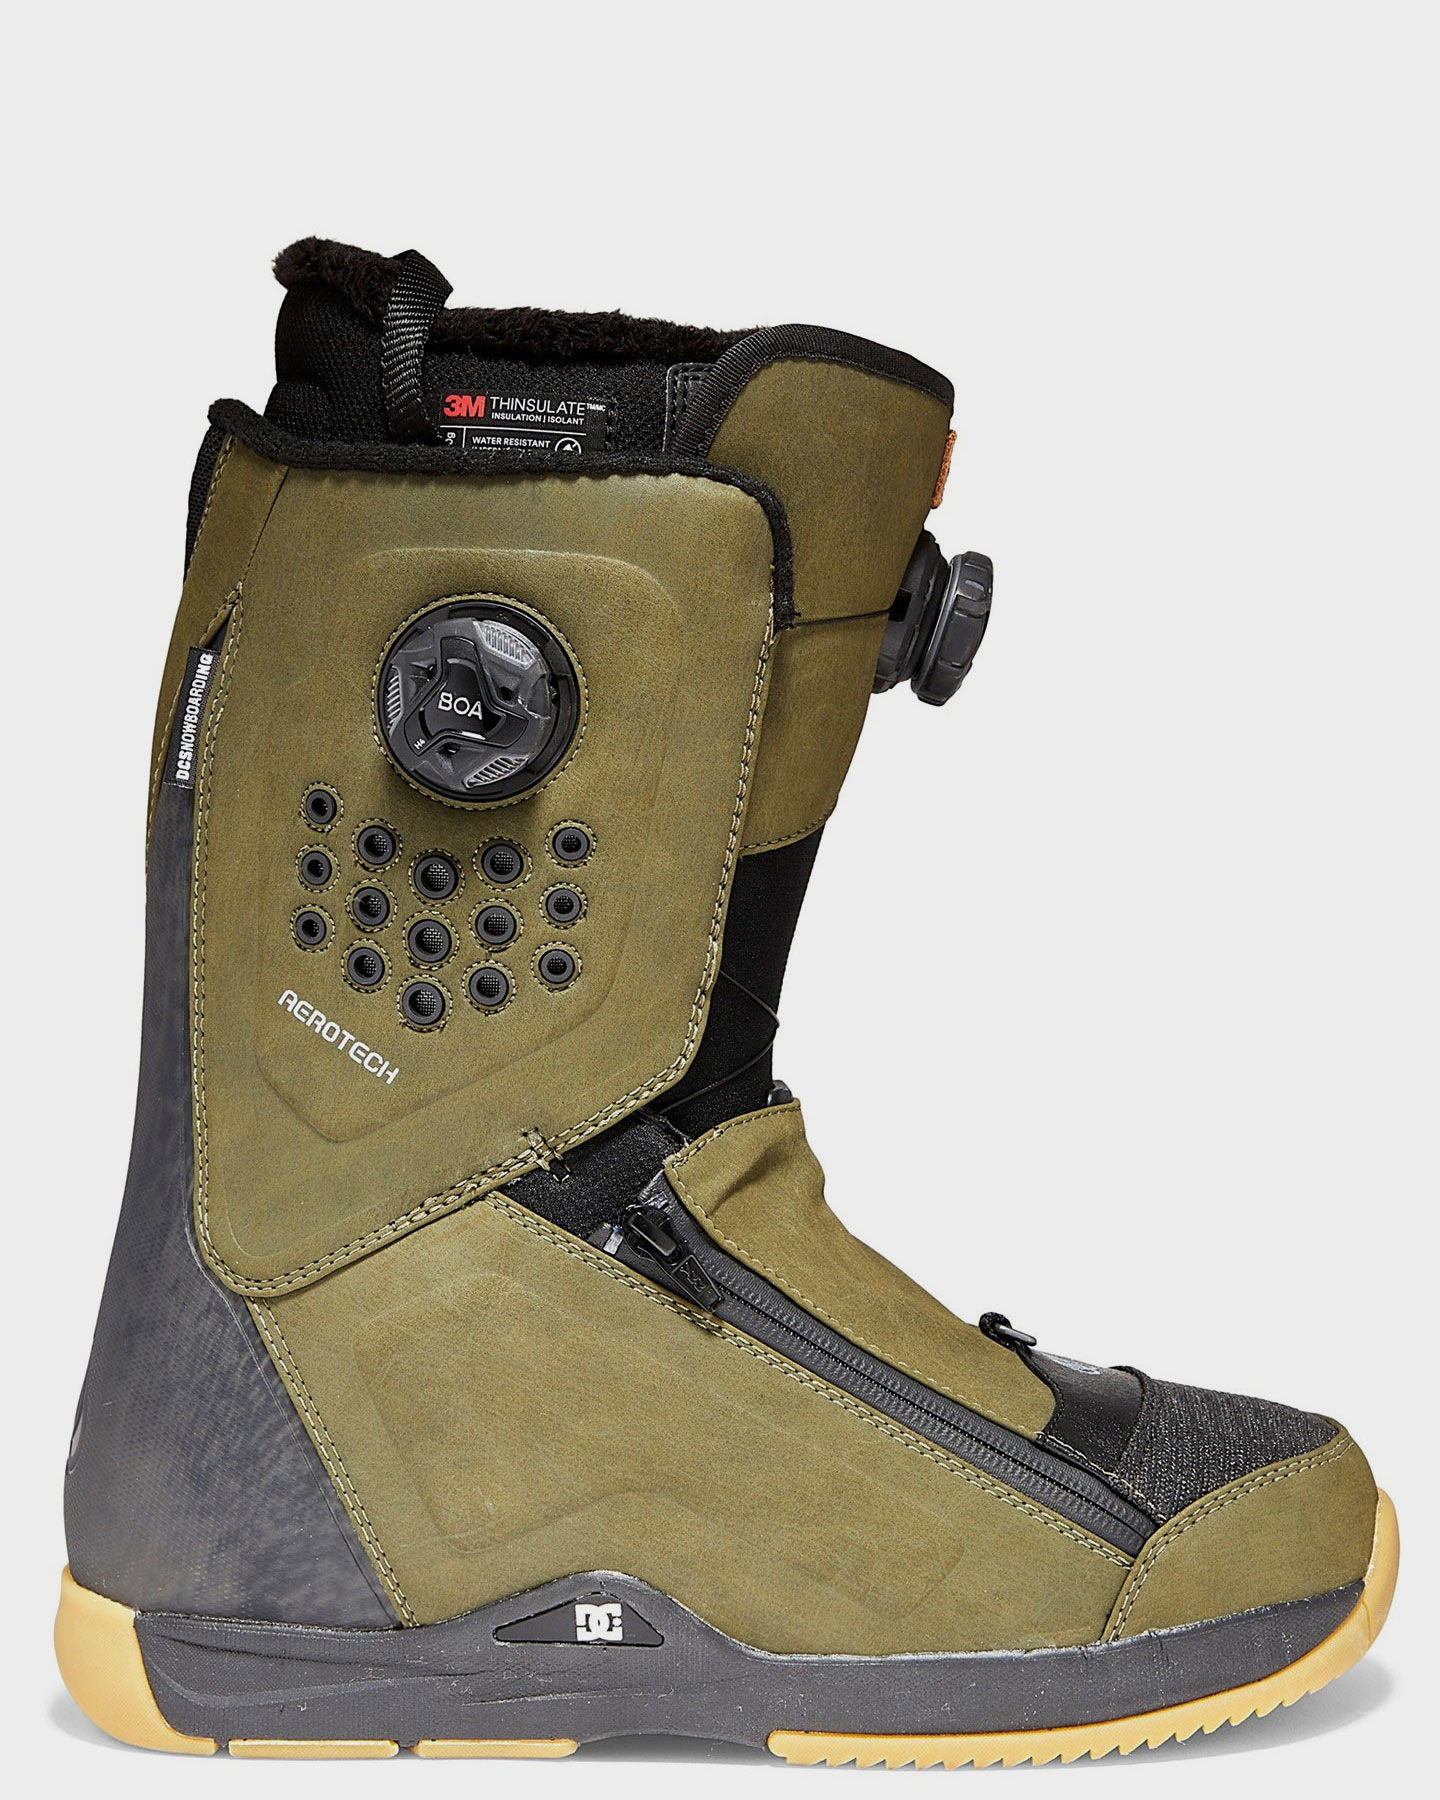 Dc Shoes Mens Travis Rice Boa Snowboard Boots - Olive | SurfStitch